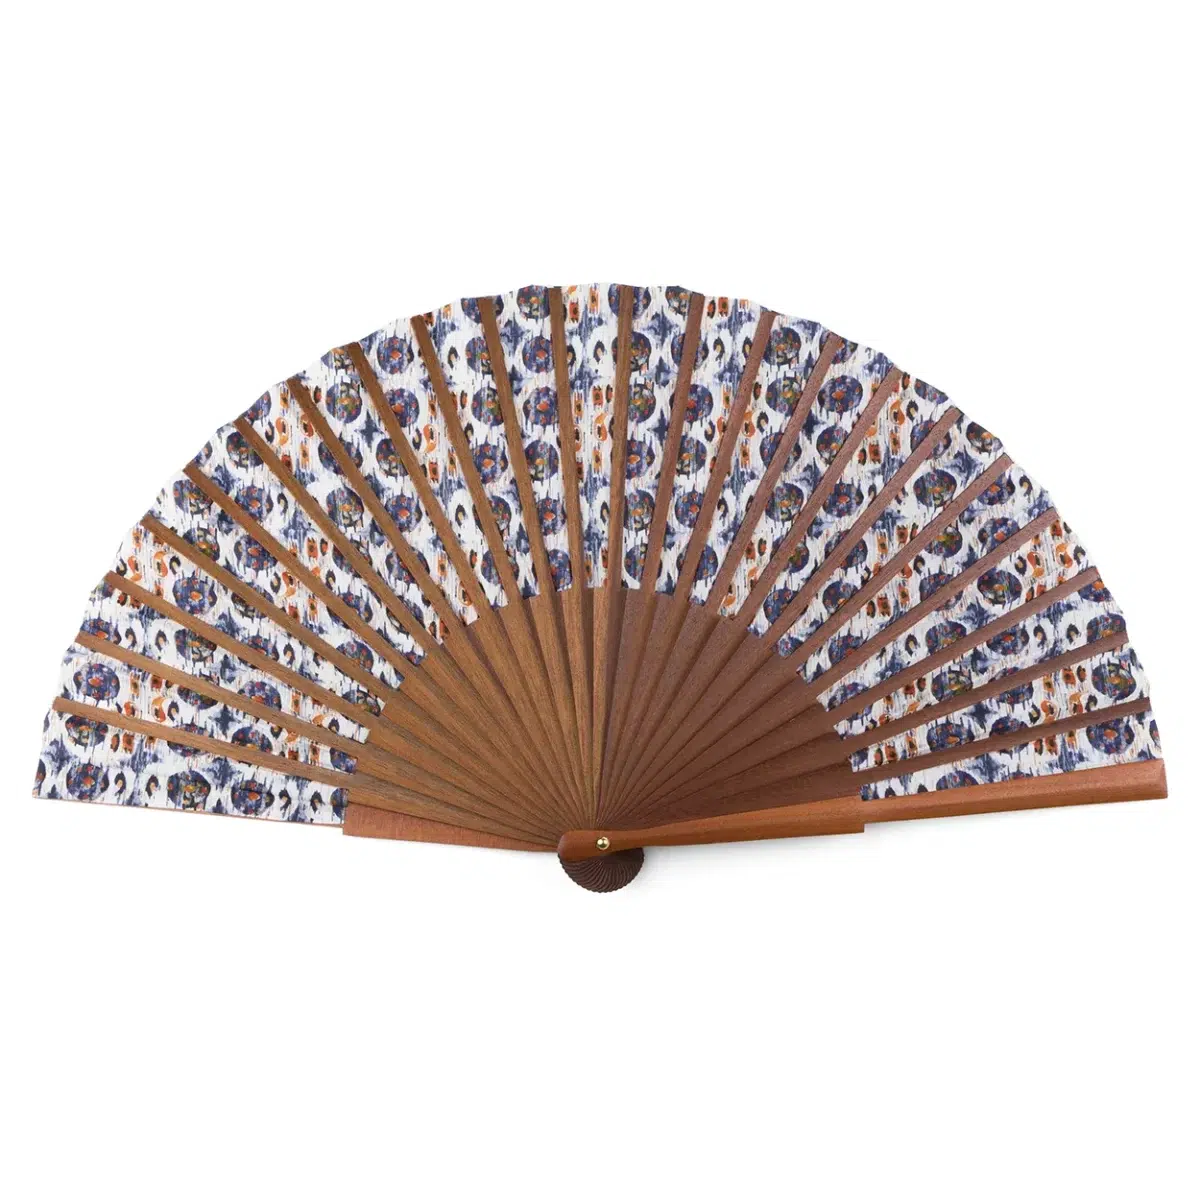 Backside of a Silk and Wood Fan with Blue and White Print.